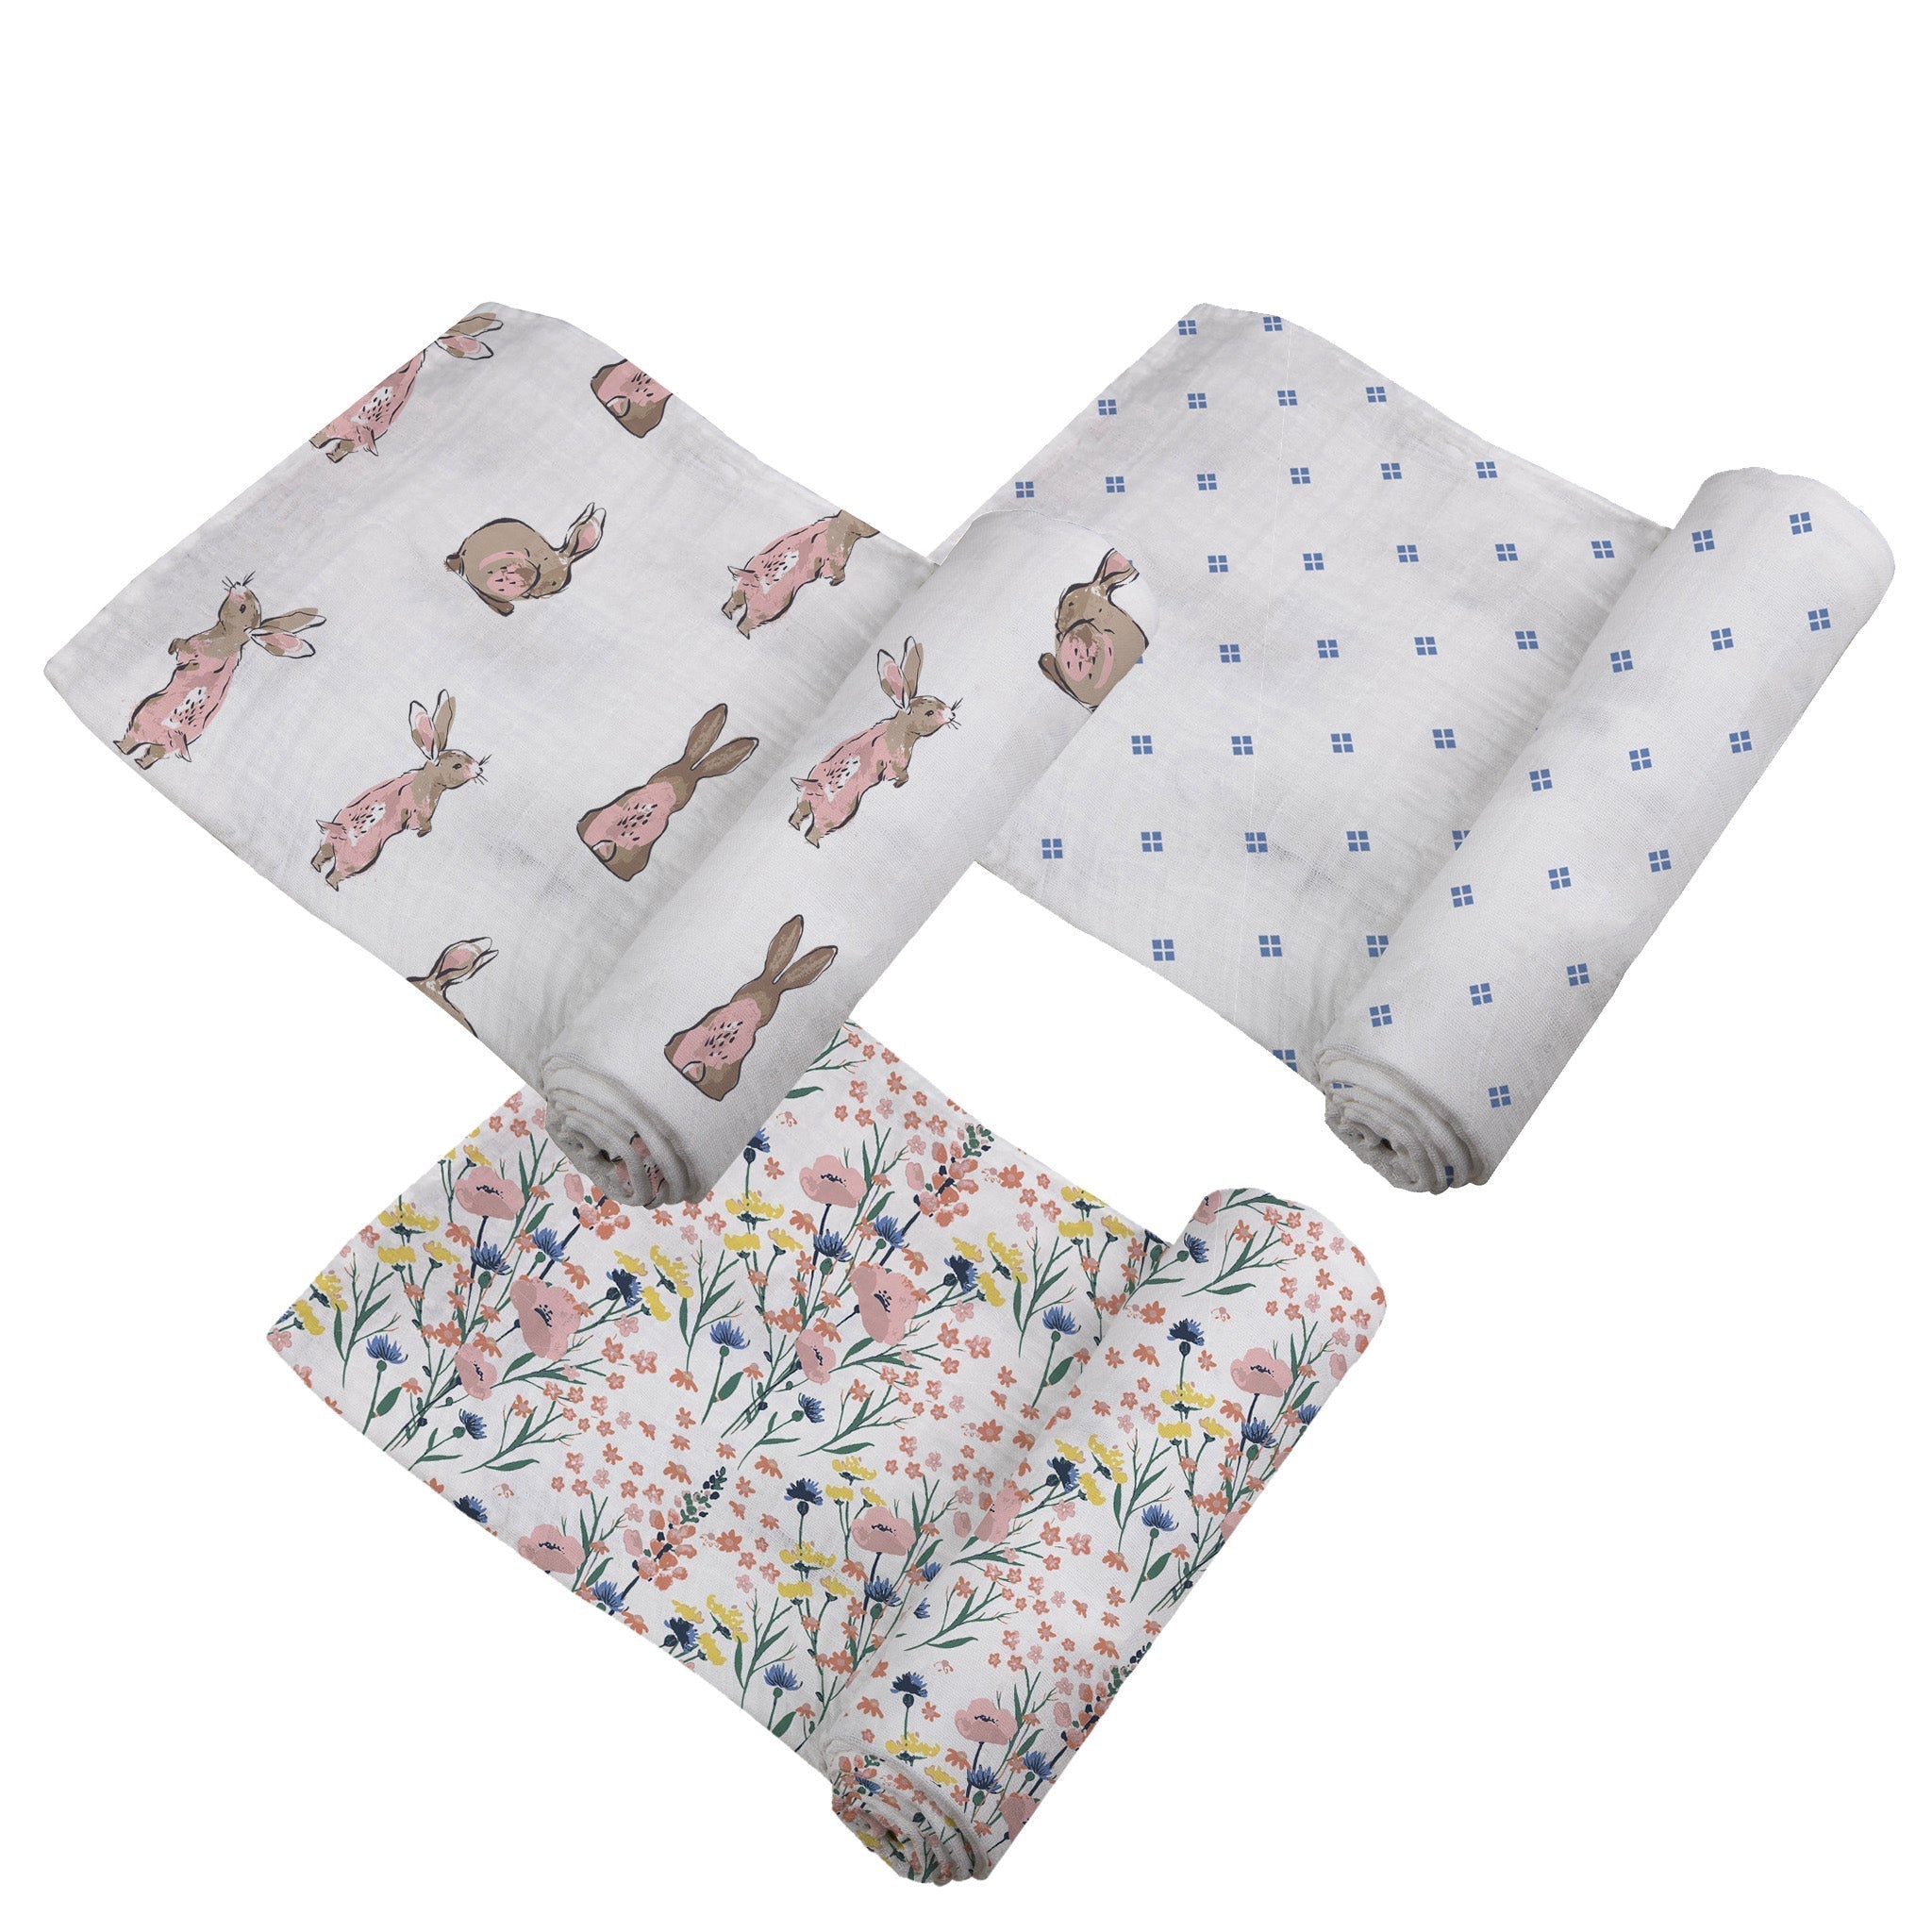 Set of three baby swaddles with bunnies and wildflowers